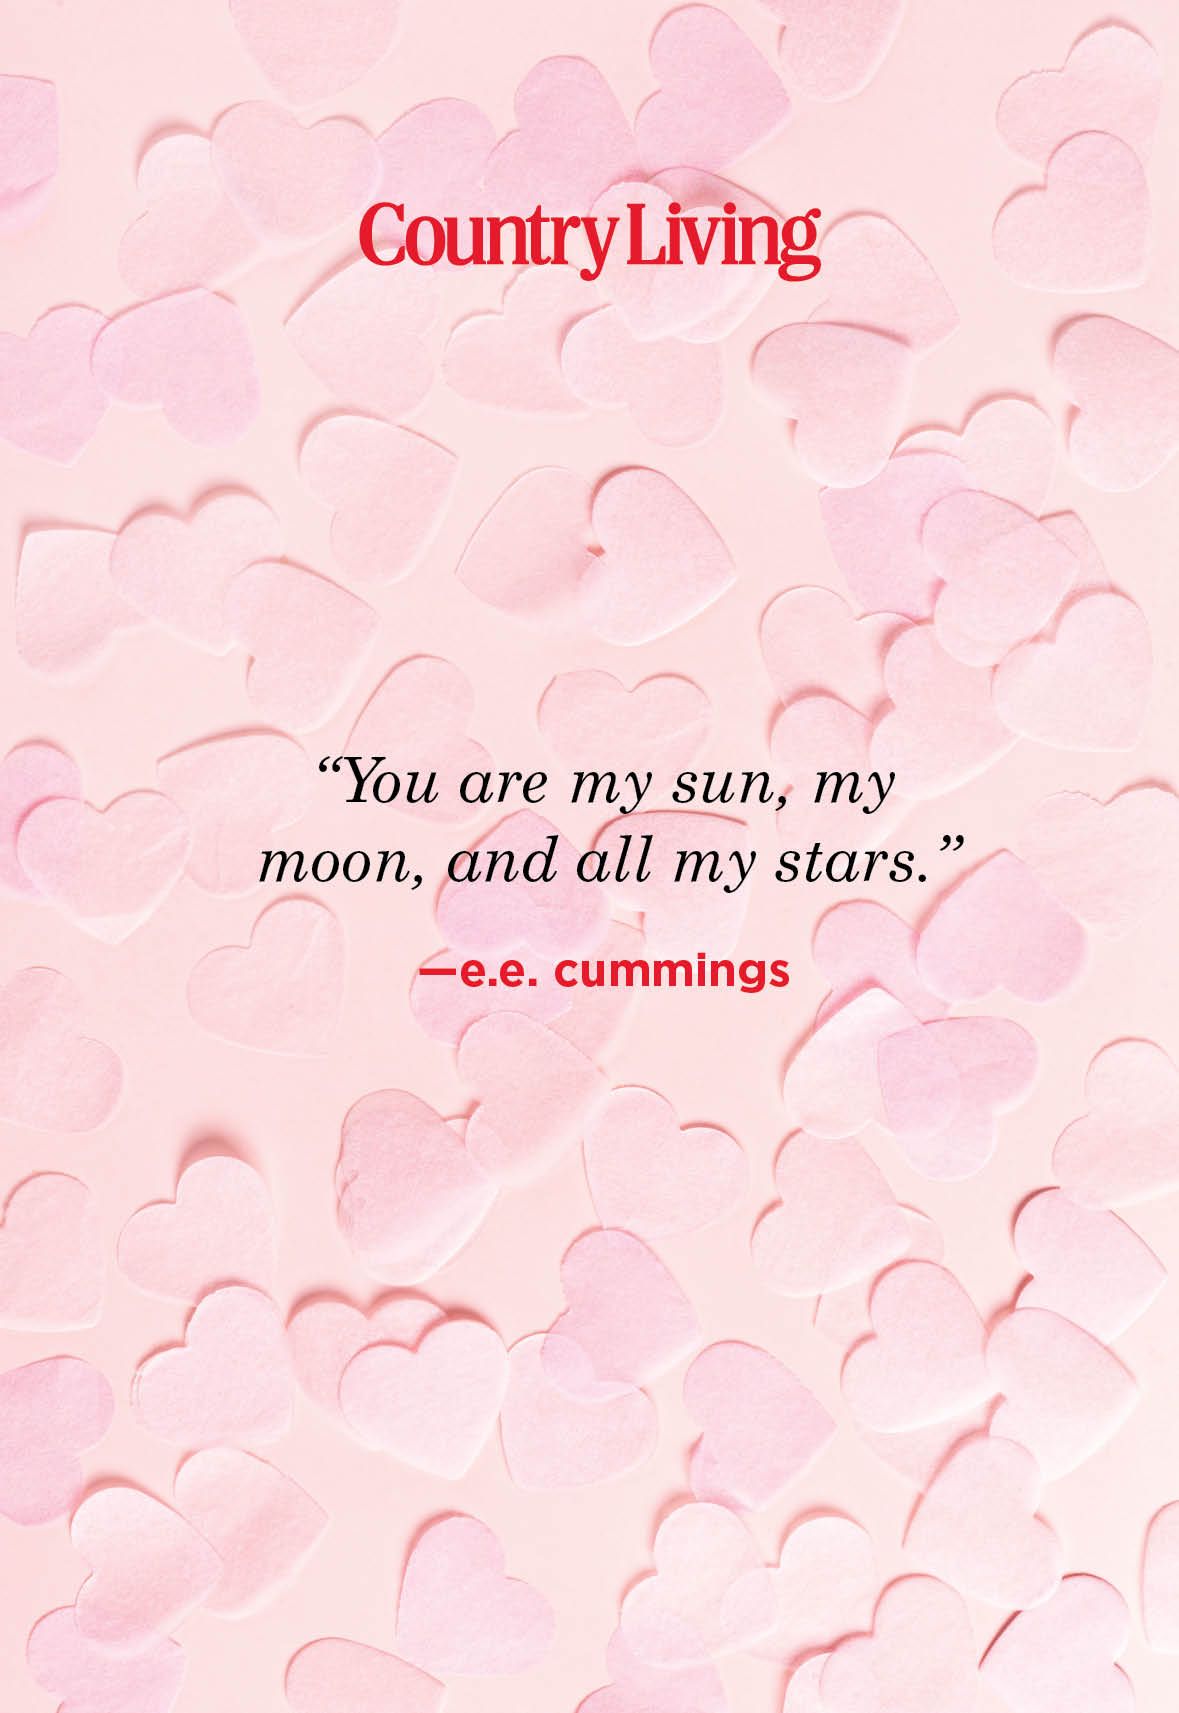 moon and sun love quotes